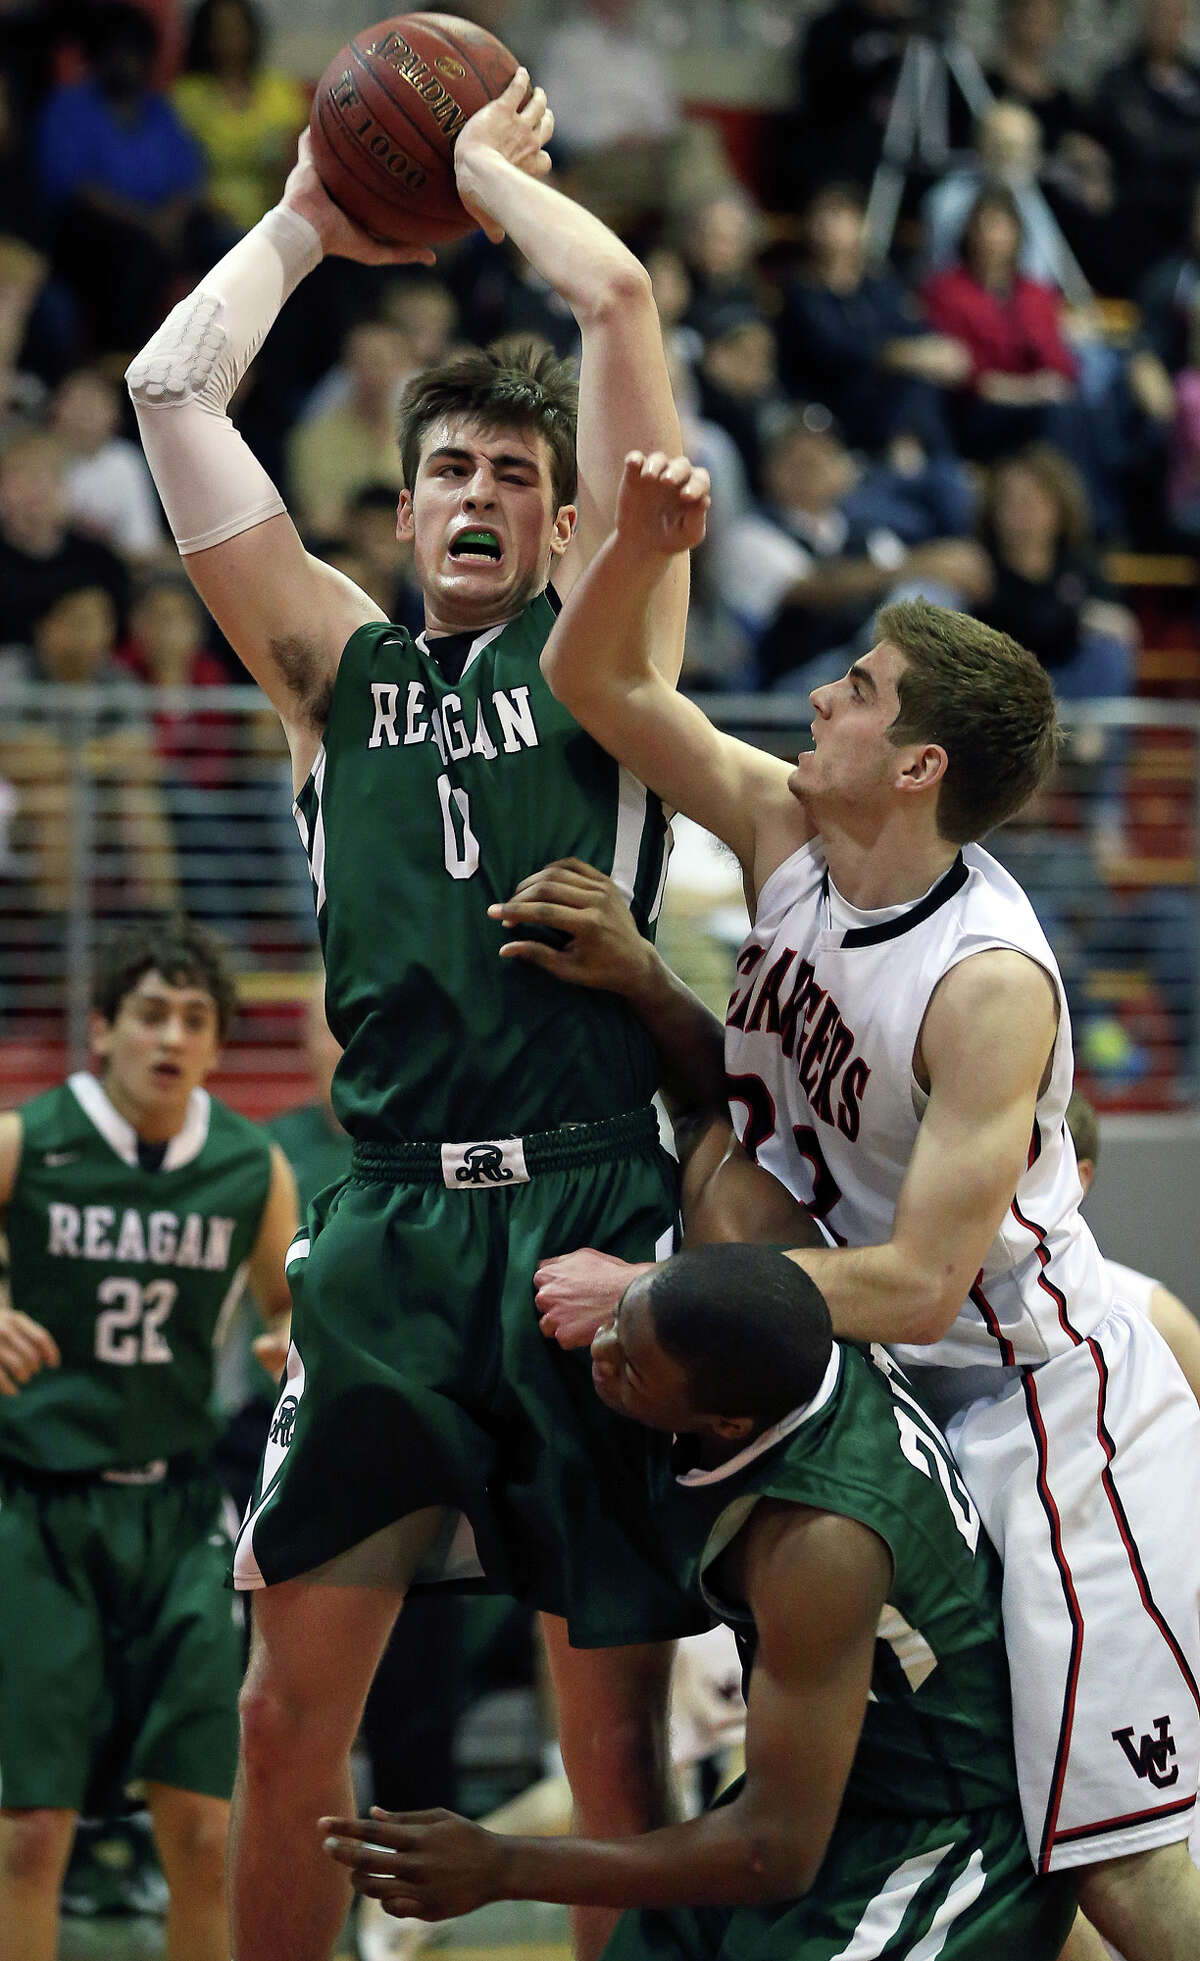 Rattler center D.J. MacLeay rips a rebound away from Sam Burmeister as Reagan plays Churchill at the Lee High School gym on February 8, 2013.